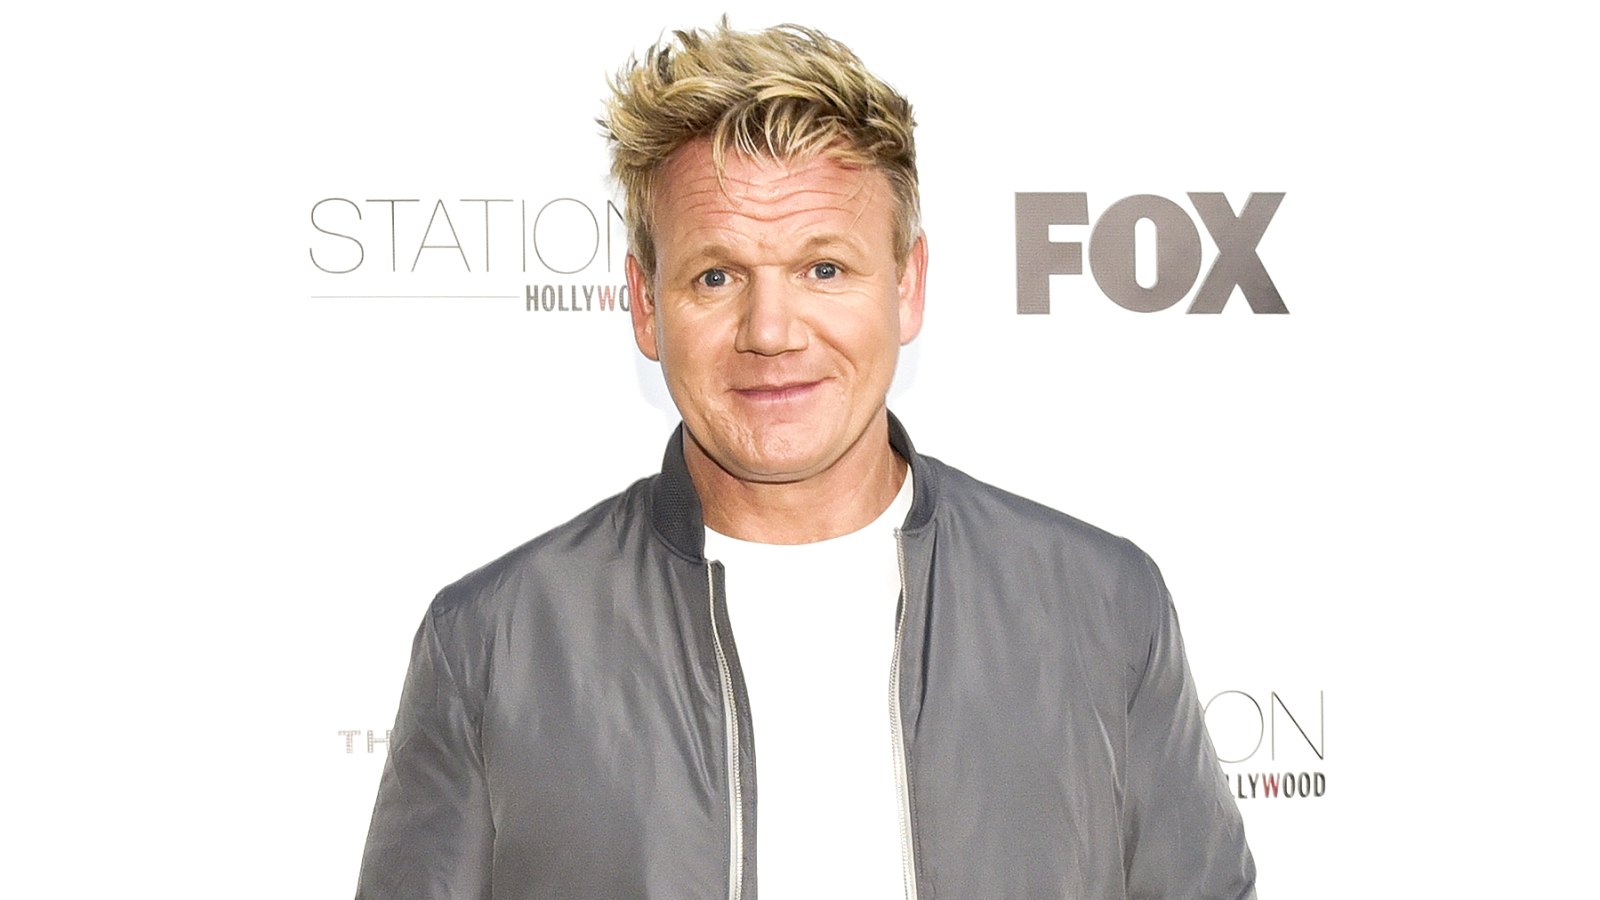 Gordon Ramsay attends "The F Word" celebration at Station Hollywood at W Hollywood Hotel on May 22, 2017 in Hollywood, California.